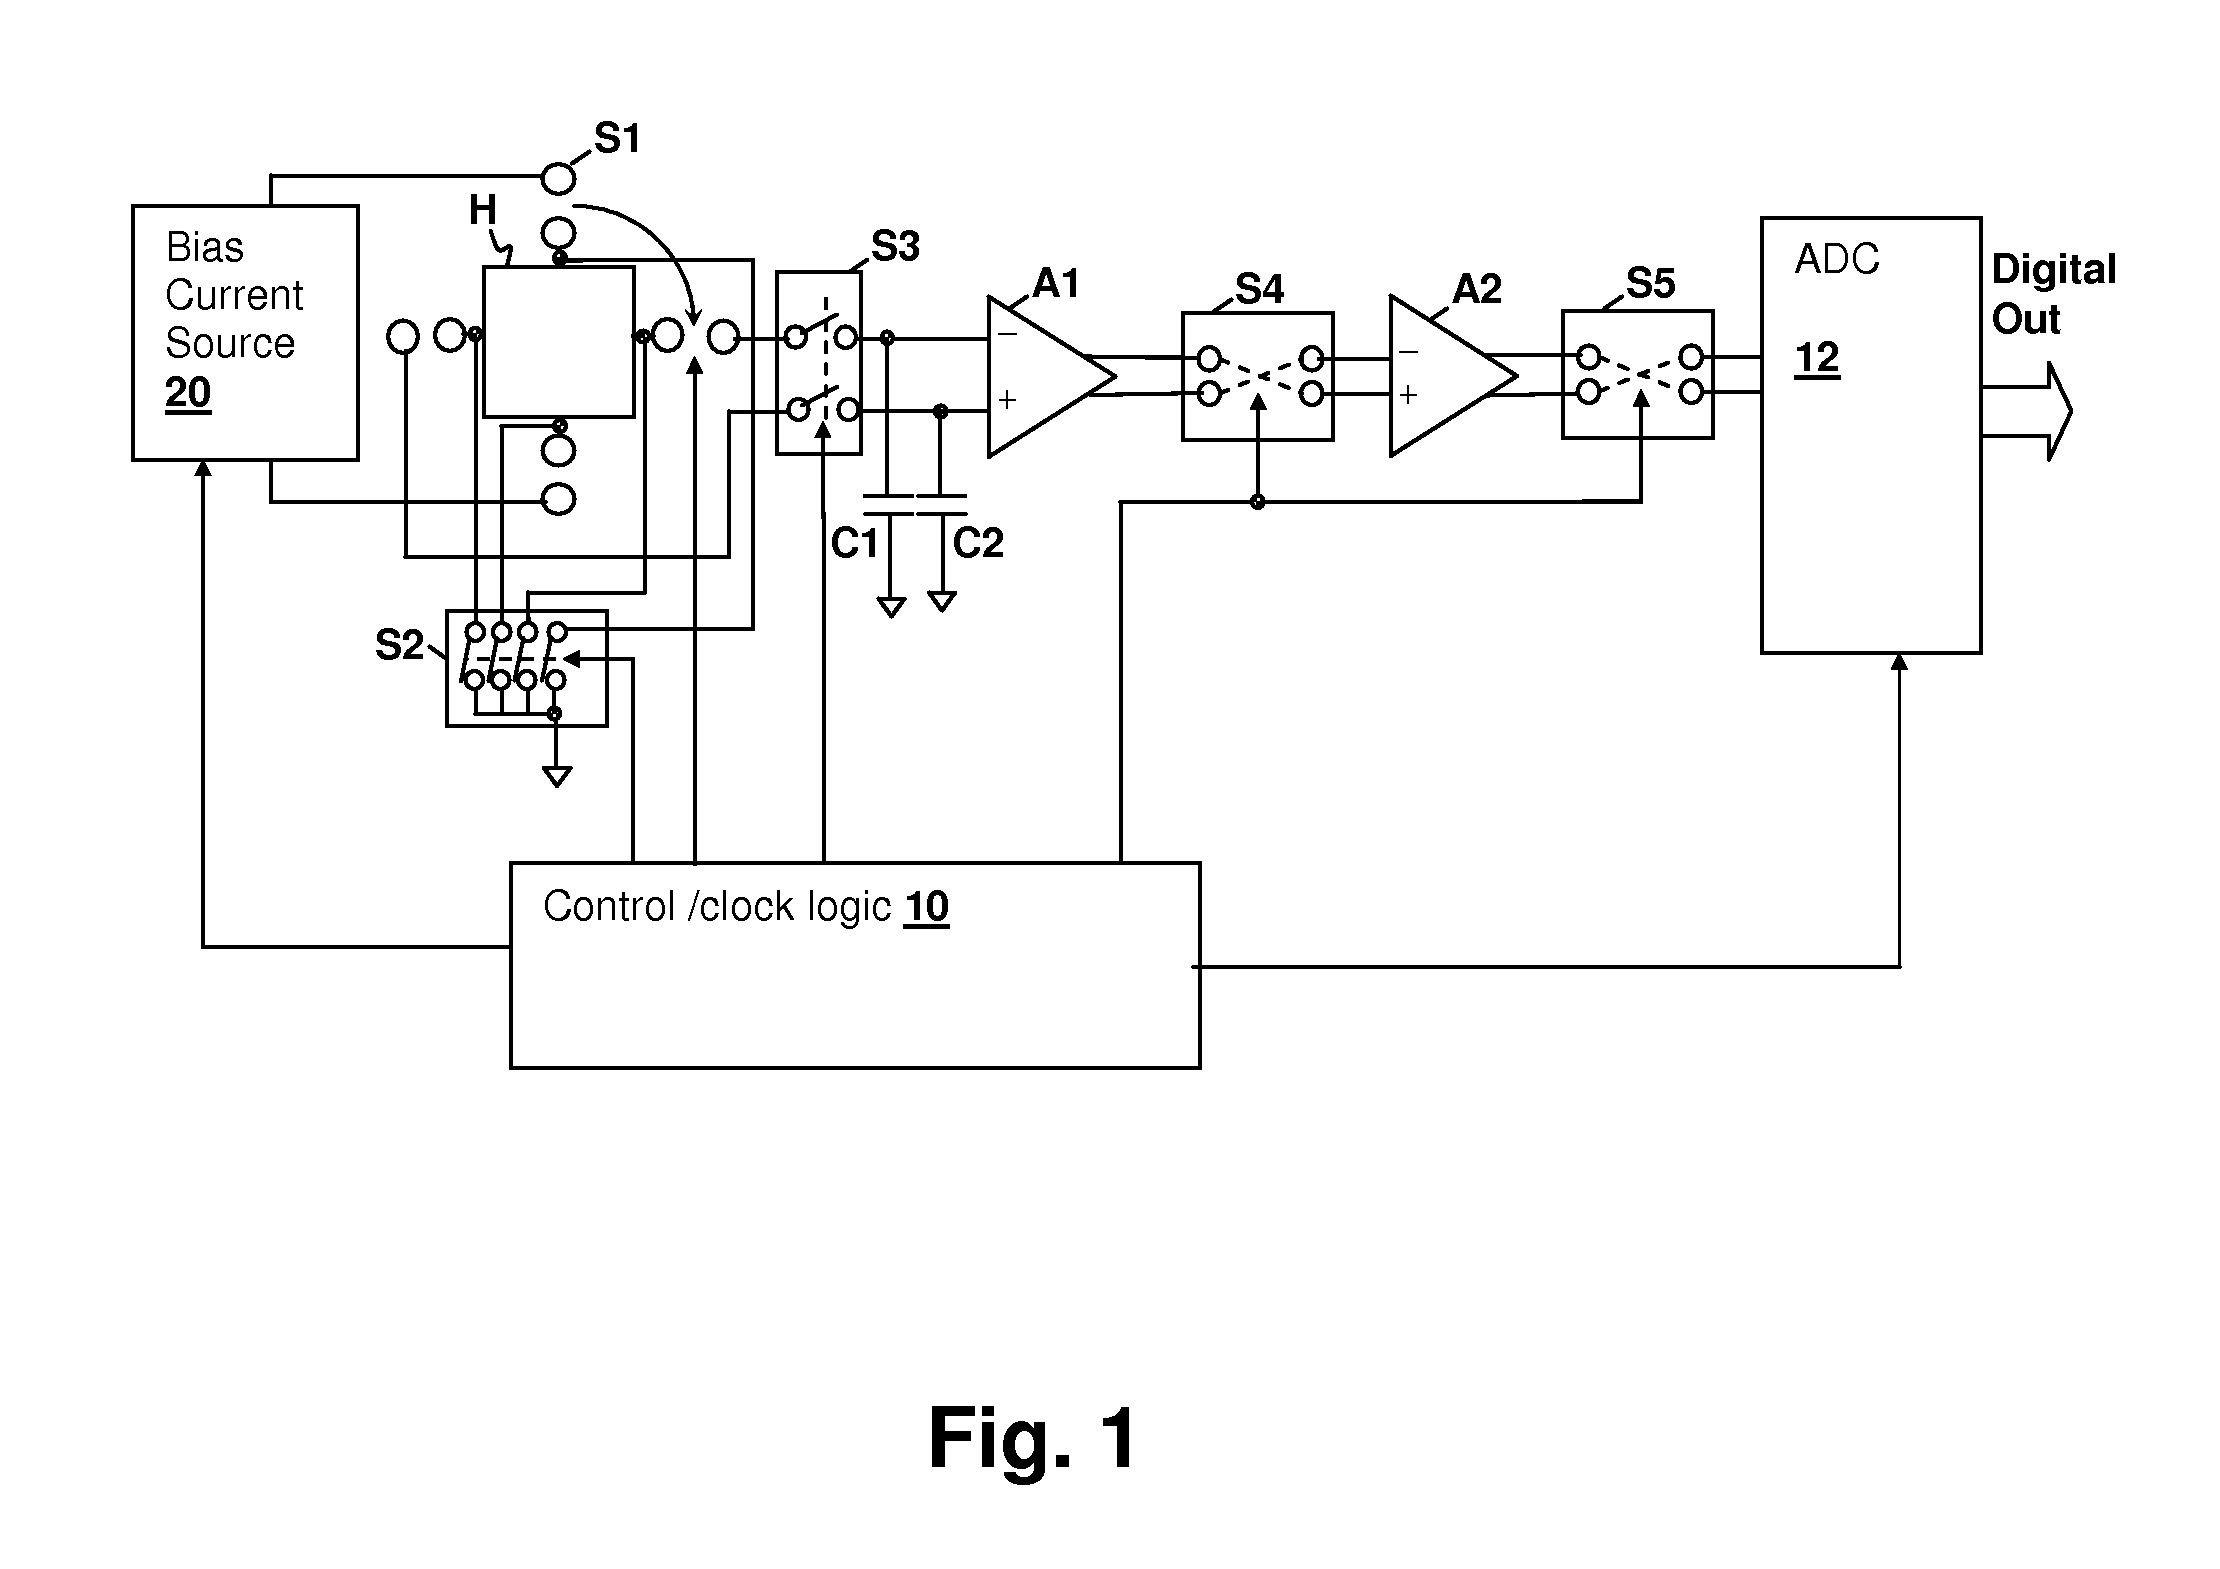 Temperature and process-stable magnetic field sensor bias current source